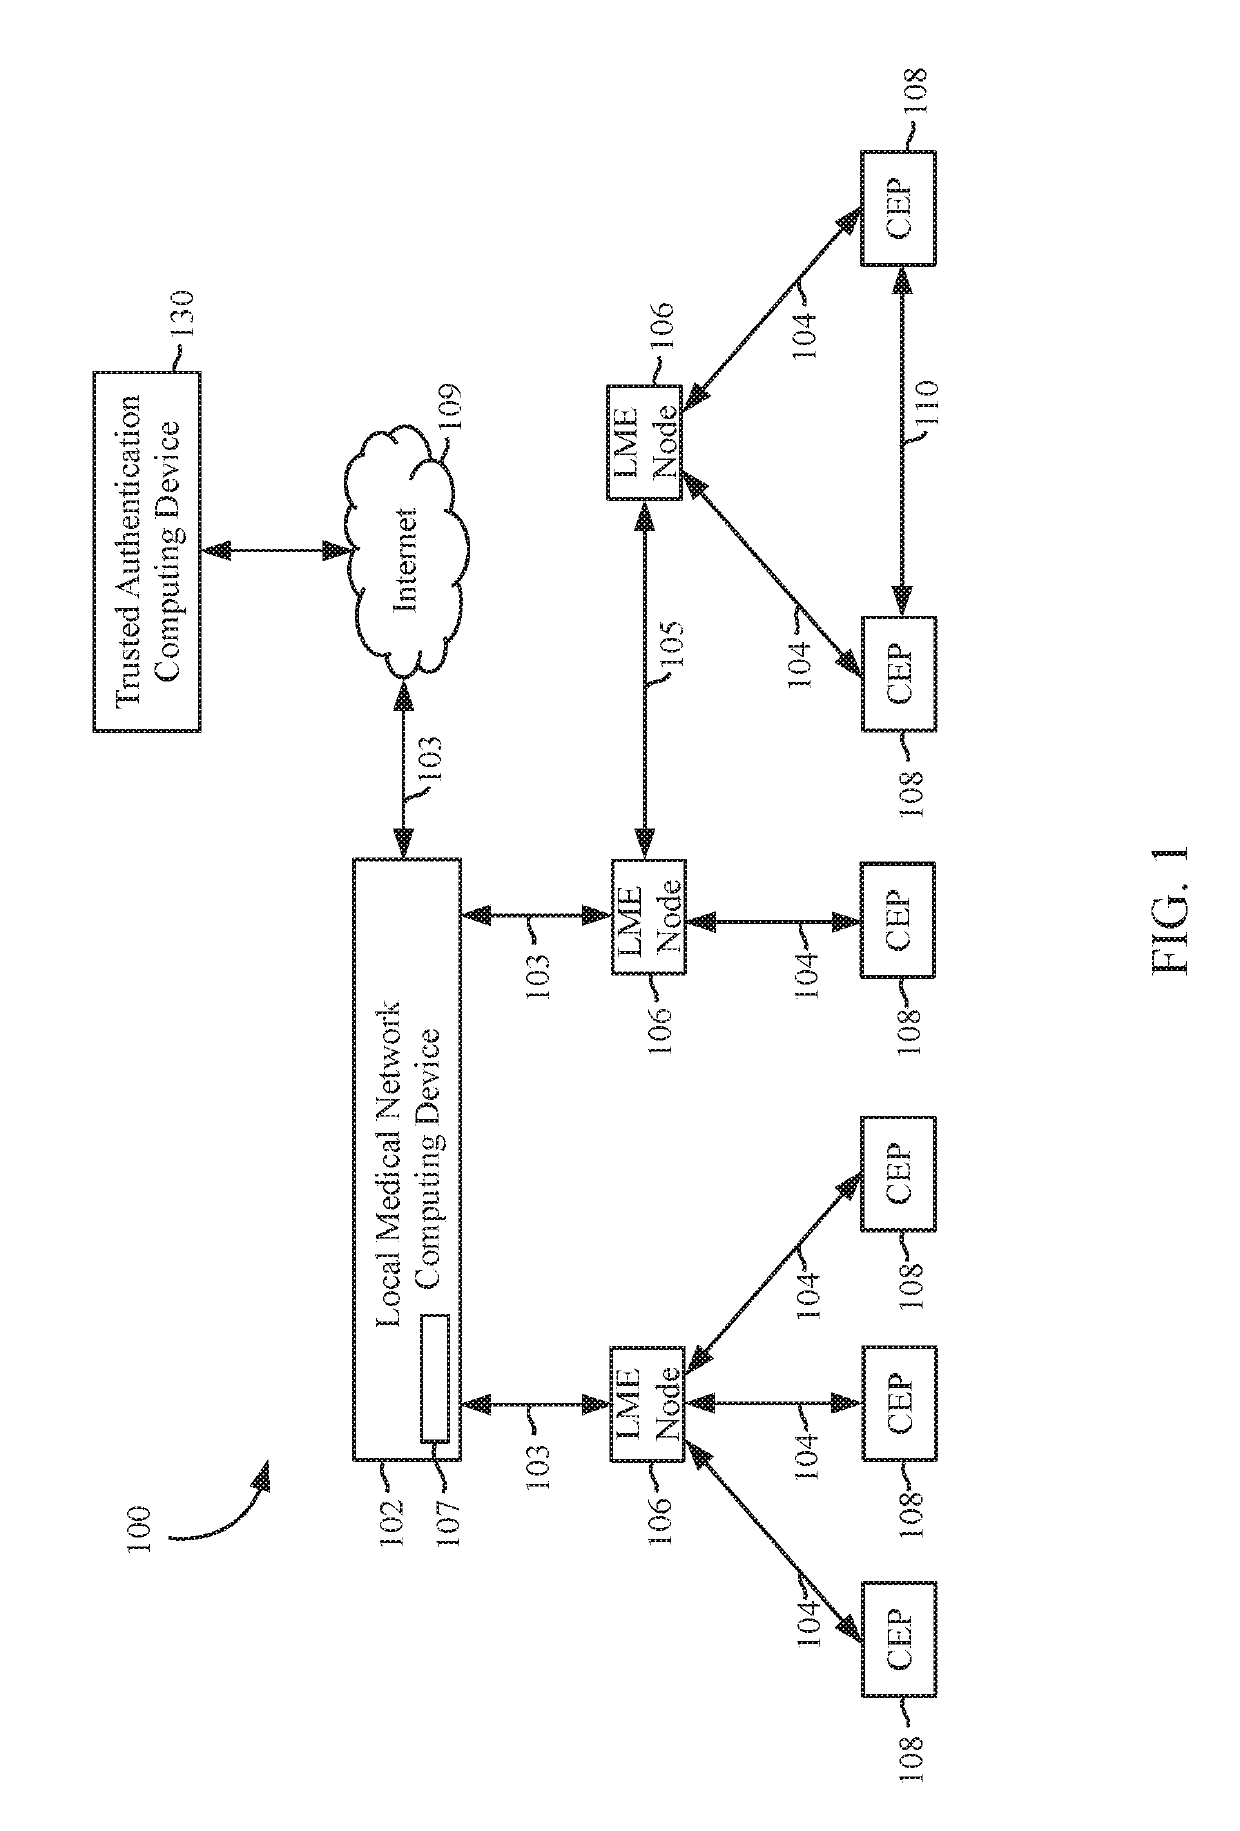 Method for authenticating devices in a medical network